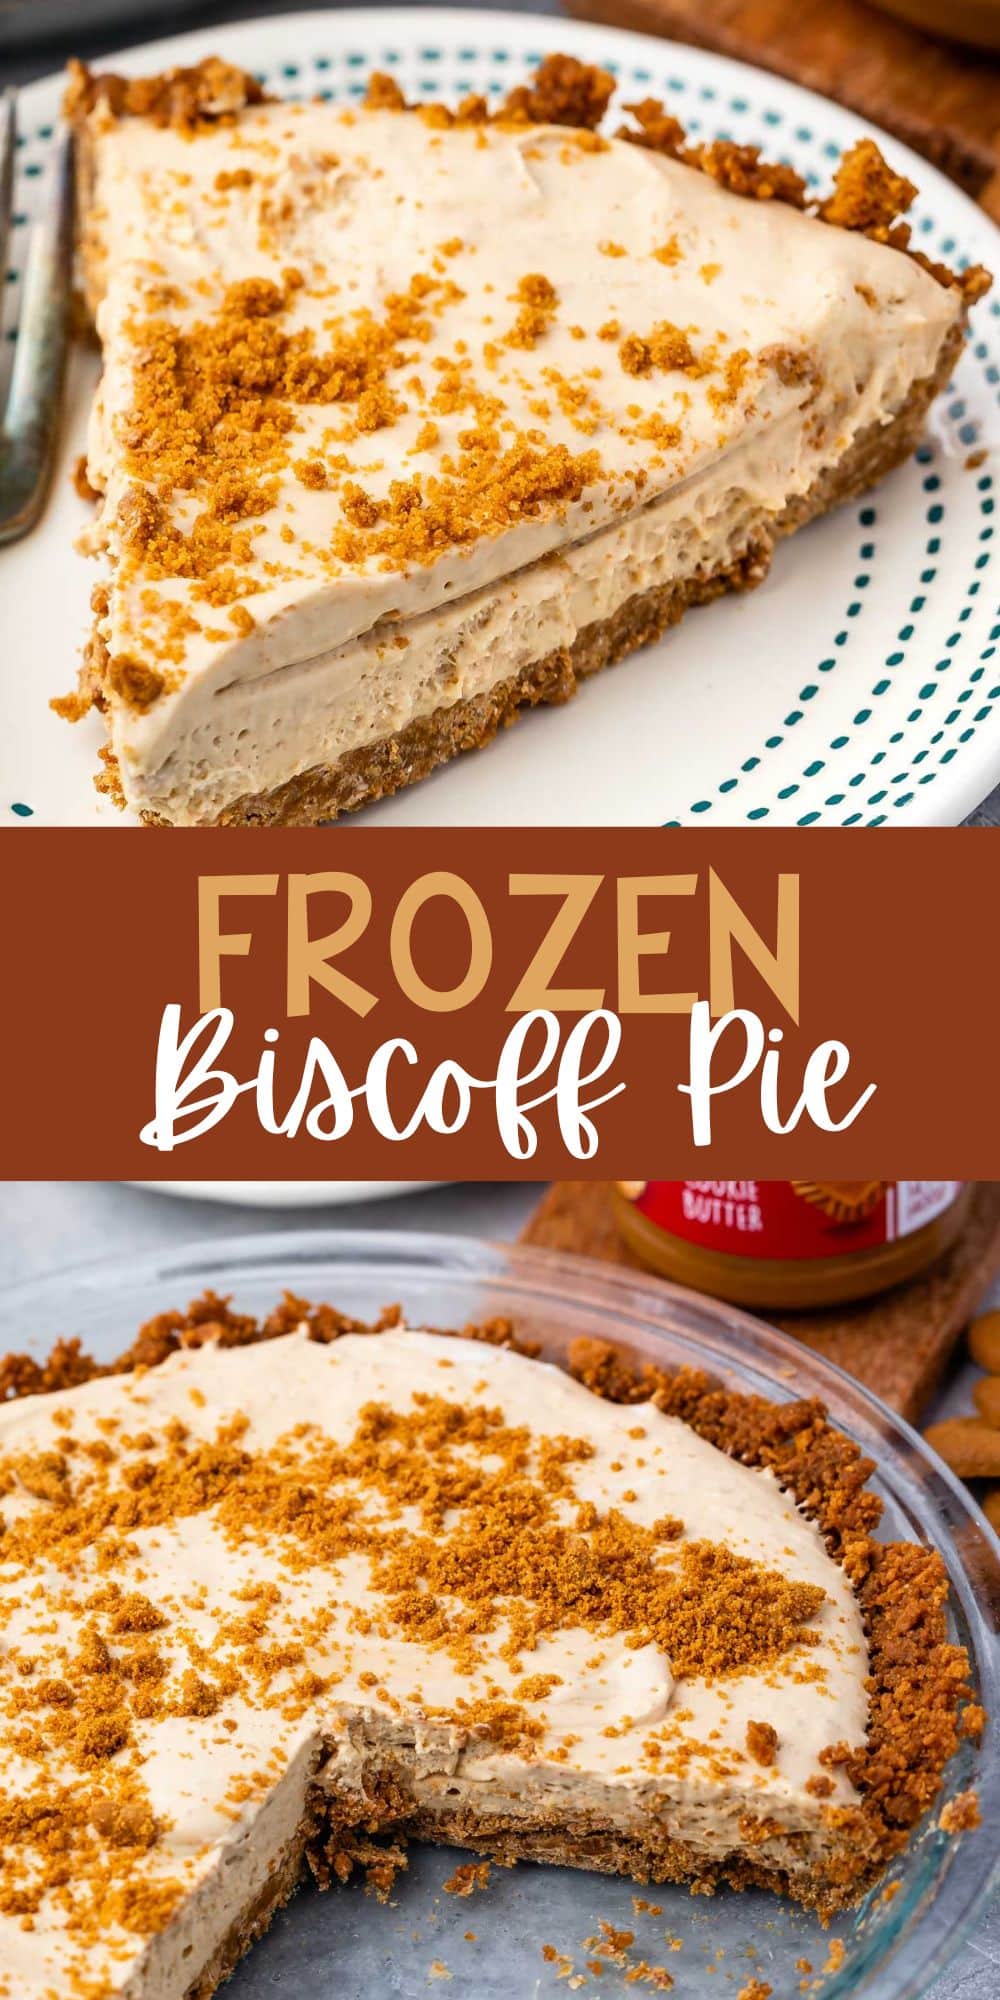 two photos of slice of pie on a white plate with biscoff crumble on top with words on the image.